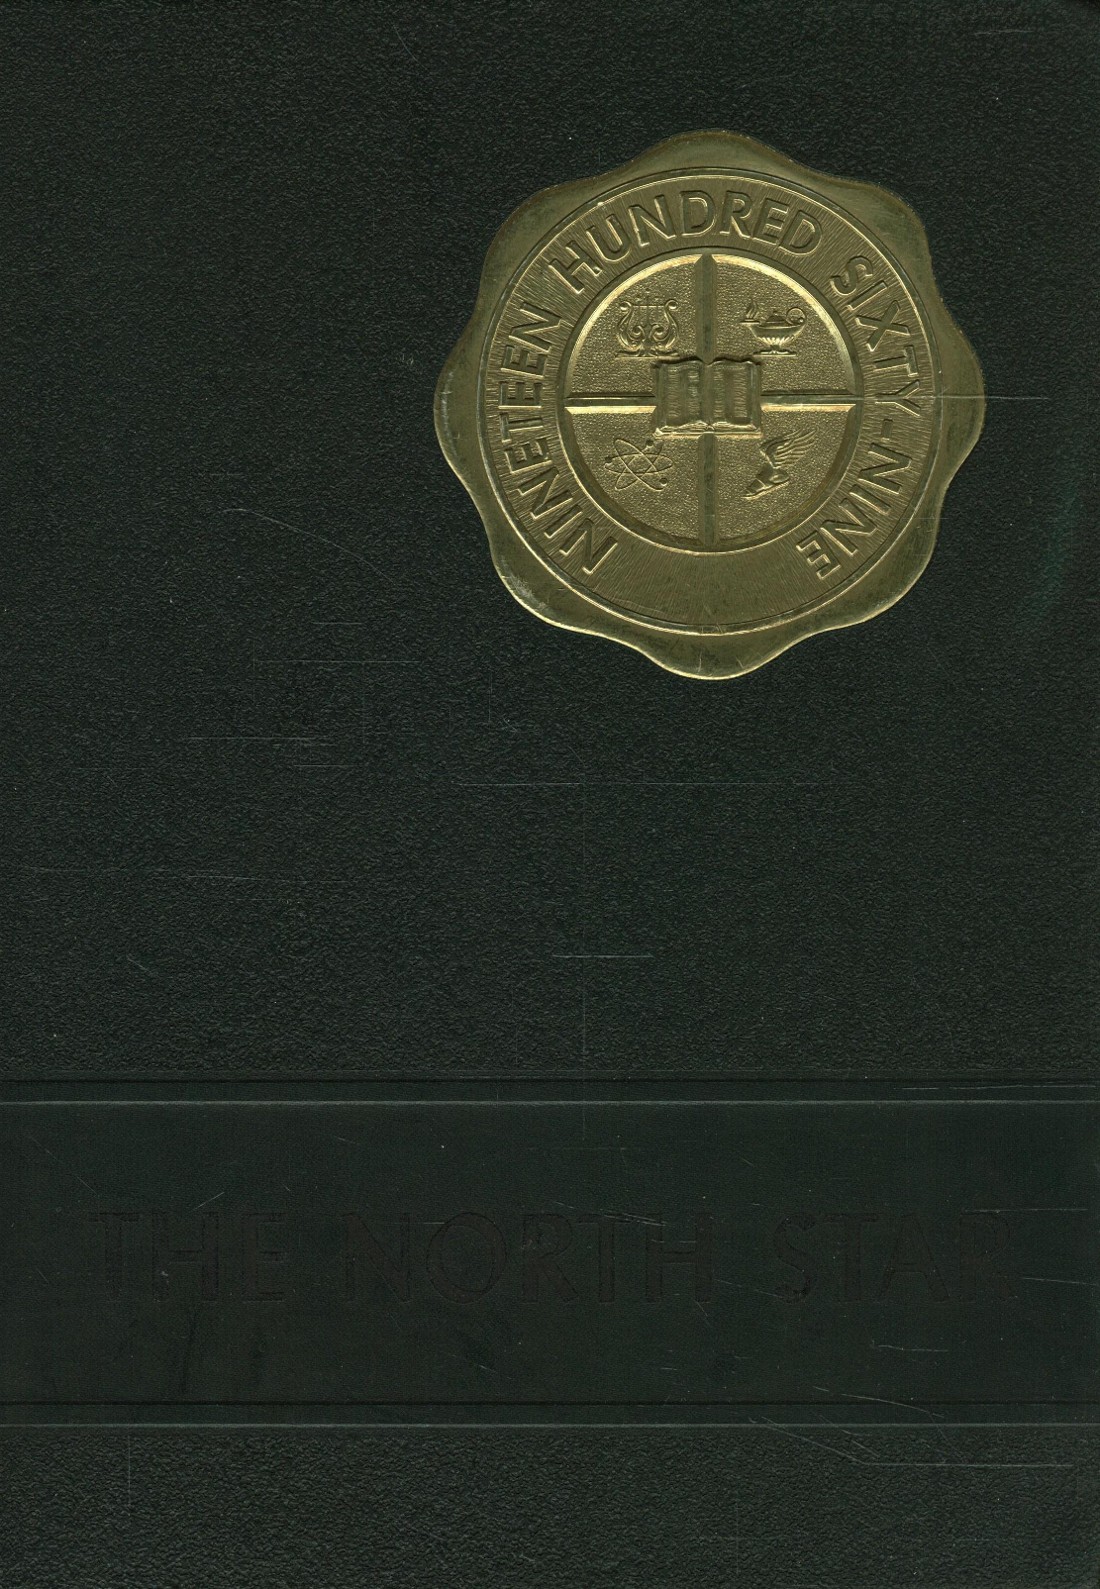 1969 yearbook from Houlton High School from Houlton, Maine for sale